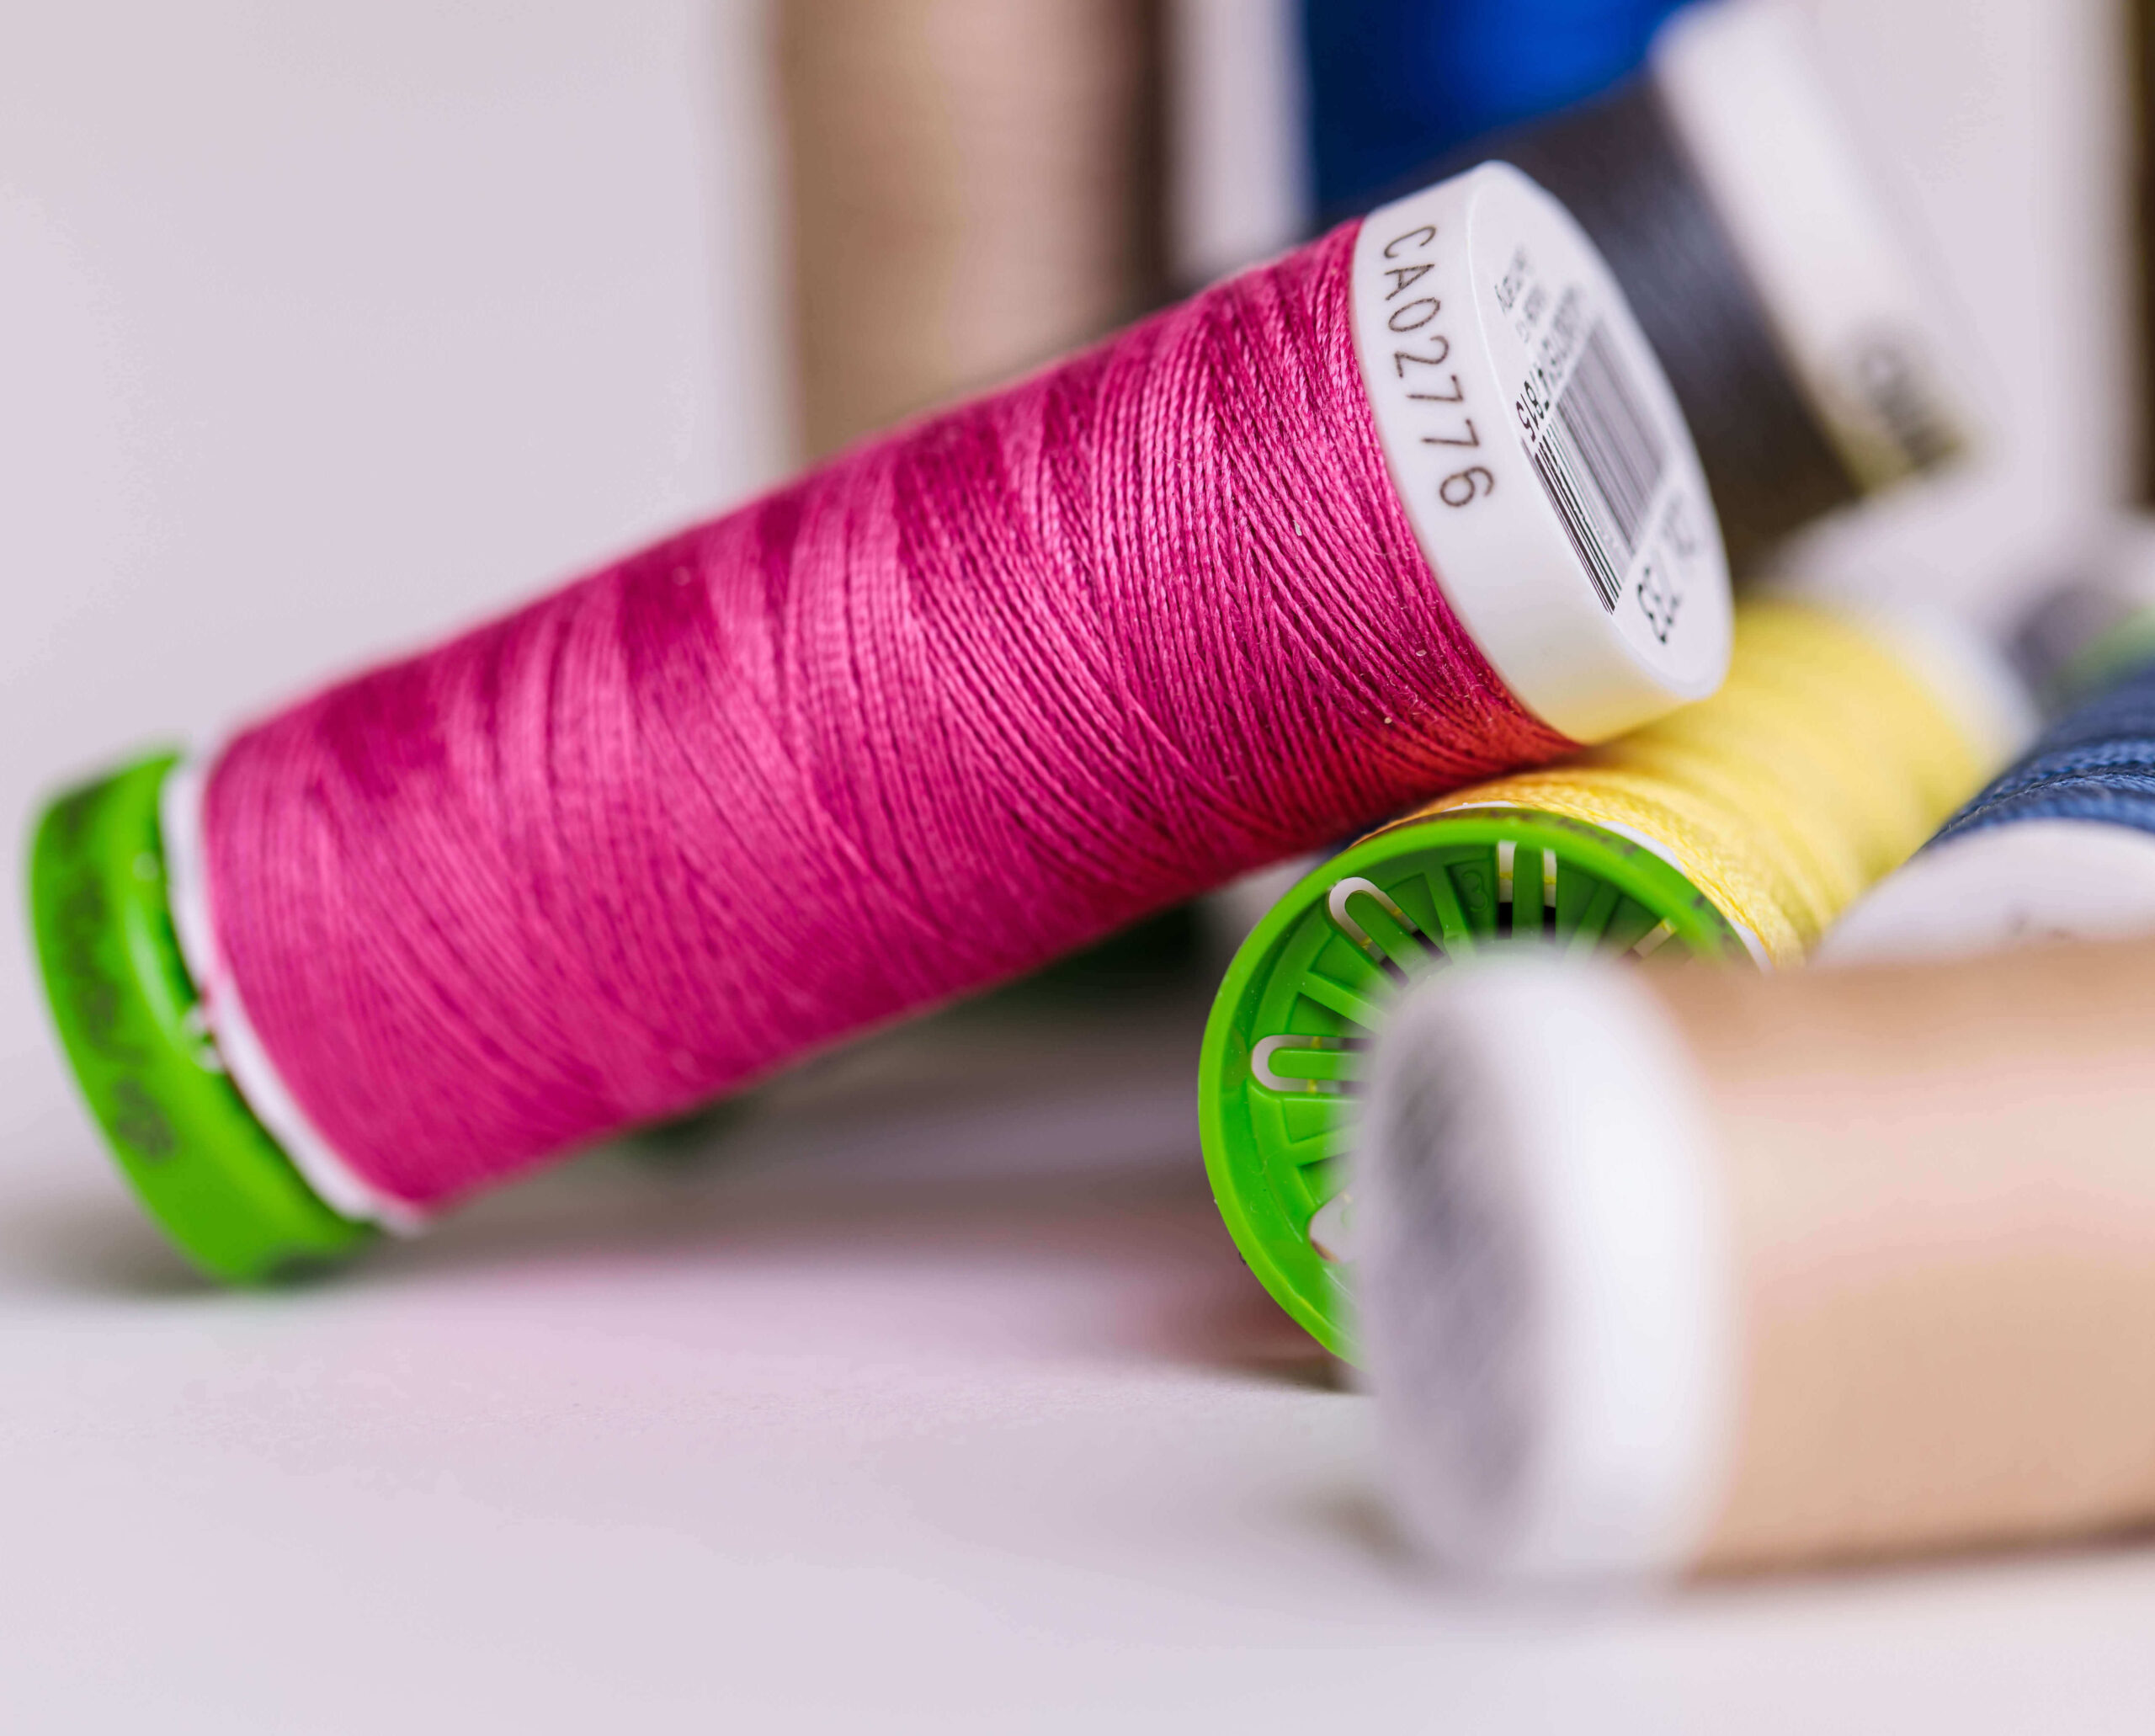 SALE! Gutermann Recycled Sewing Thread - Sew All rPET 100m - Maven